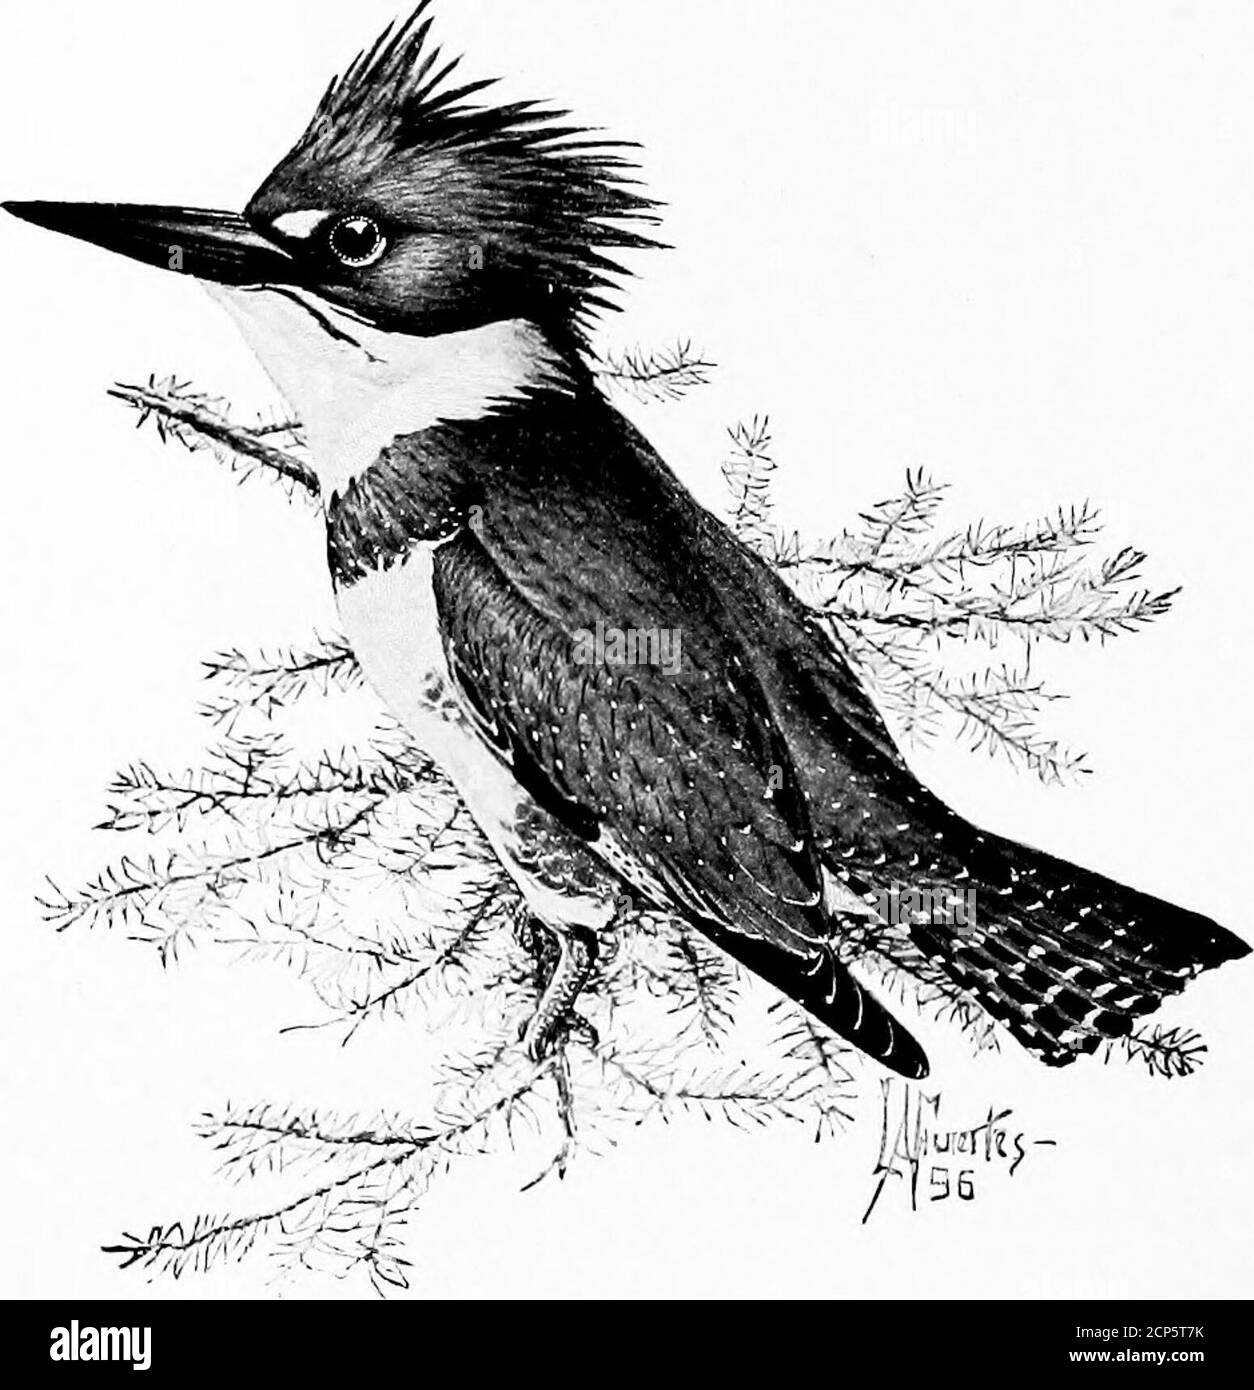 . Further observations on Minnesota birds : their economic relations to the agriculturist . reh dififerent diet from that of other membersof the same family. That it seriously injures birches, maples,mountain ash, apple, evergreen, and other trees by girdling themwith holes in its seeking for sap and cambium goes without say-ing. It may and probably does consume a few insects which areattracted to the bleeding holes, but not in sufficient numbers or of 8 FURTIllik ()BSEKATI()NS ON MINNKSOTA BIRDS: the right kind to compensate for the injury inflicted upon thetrees. The bird is about Syi inche Stock Photo